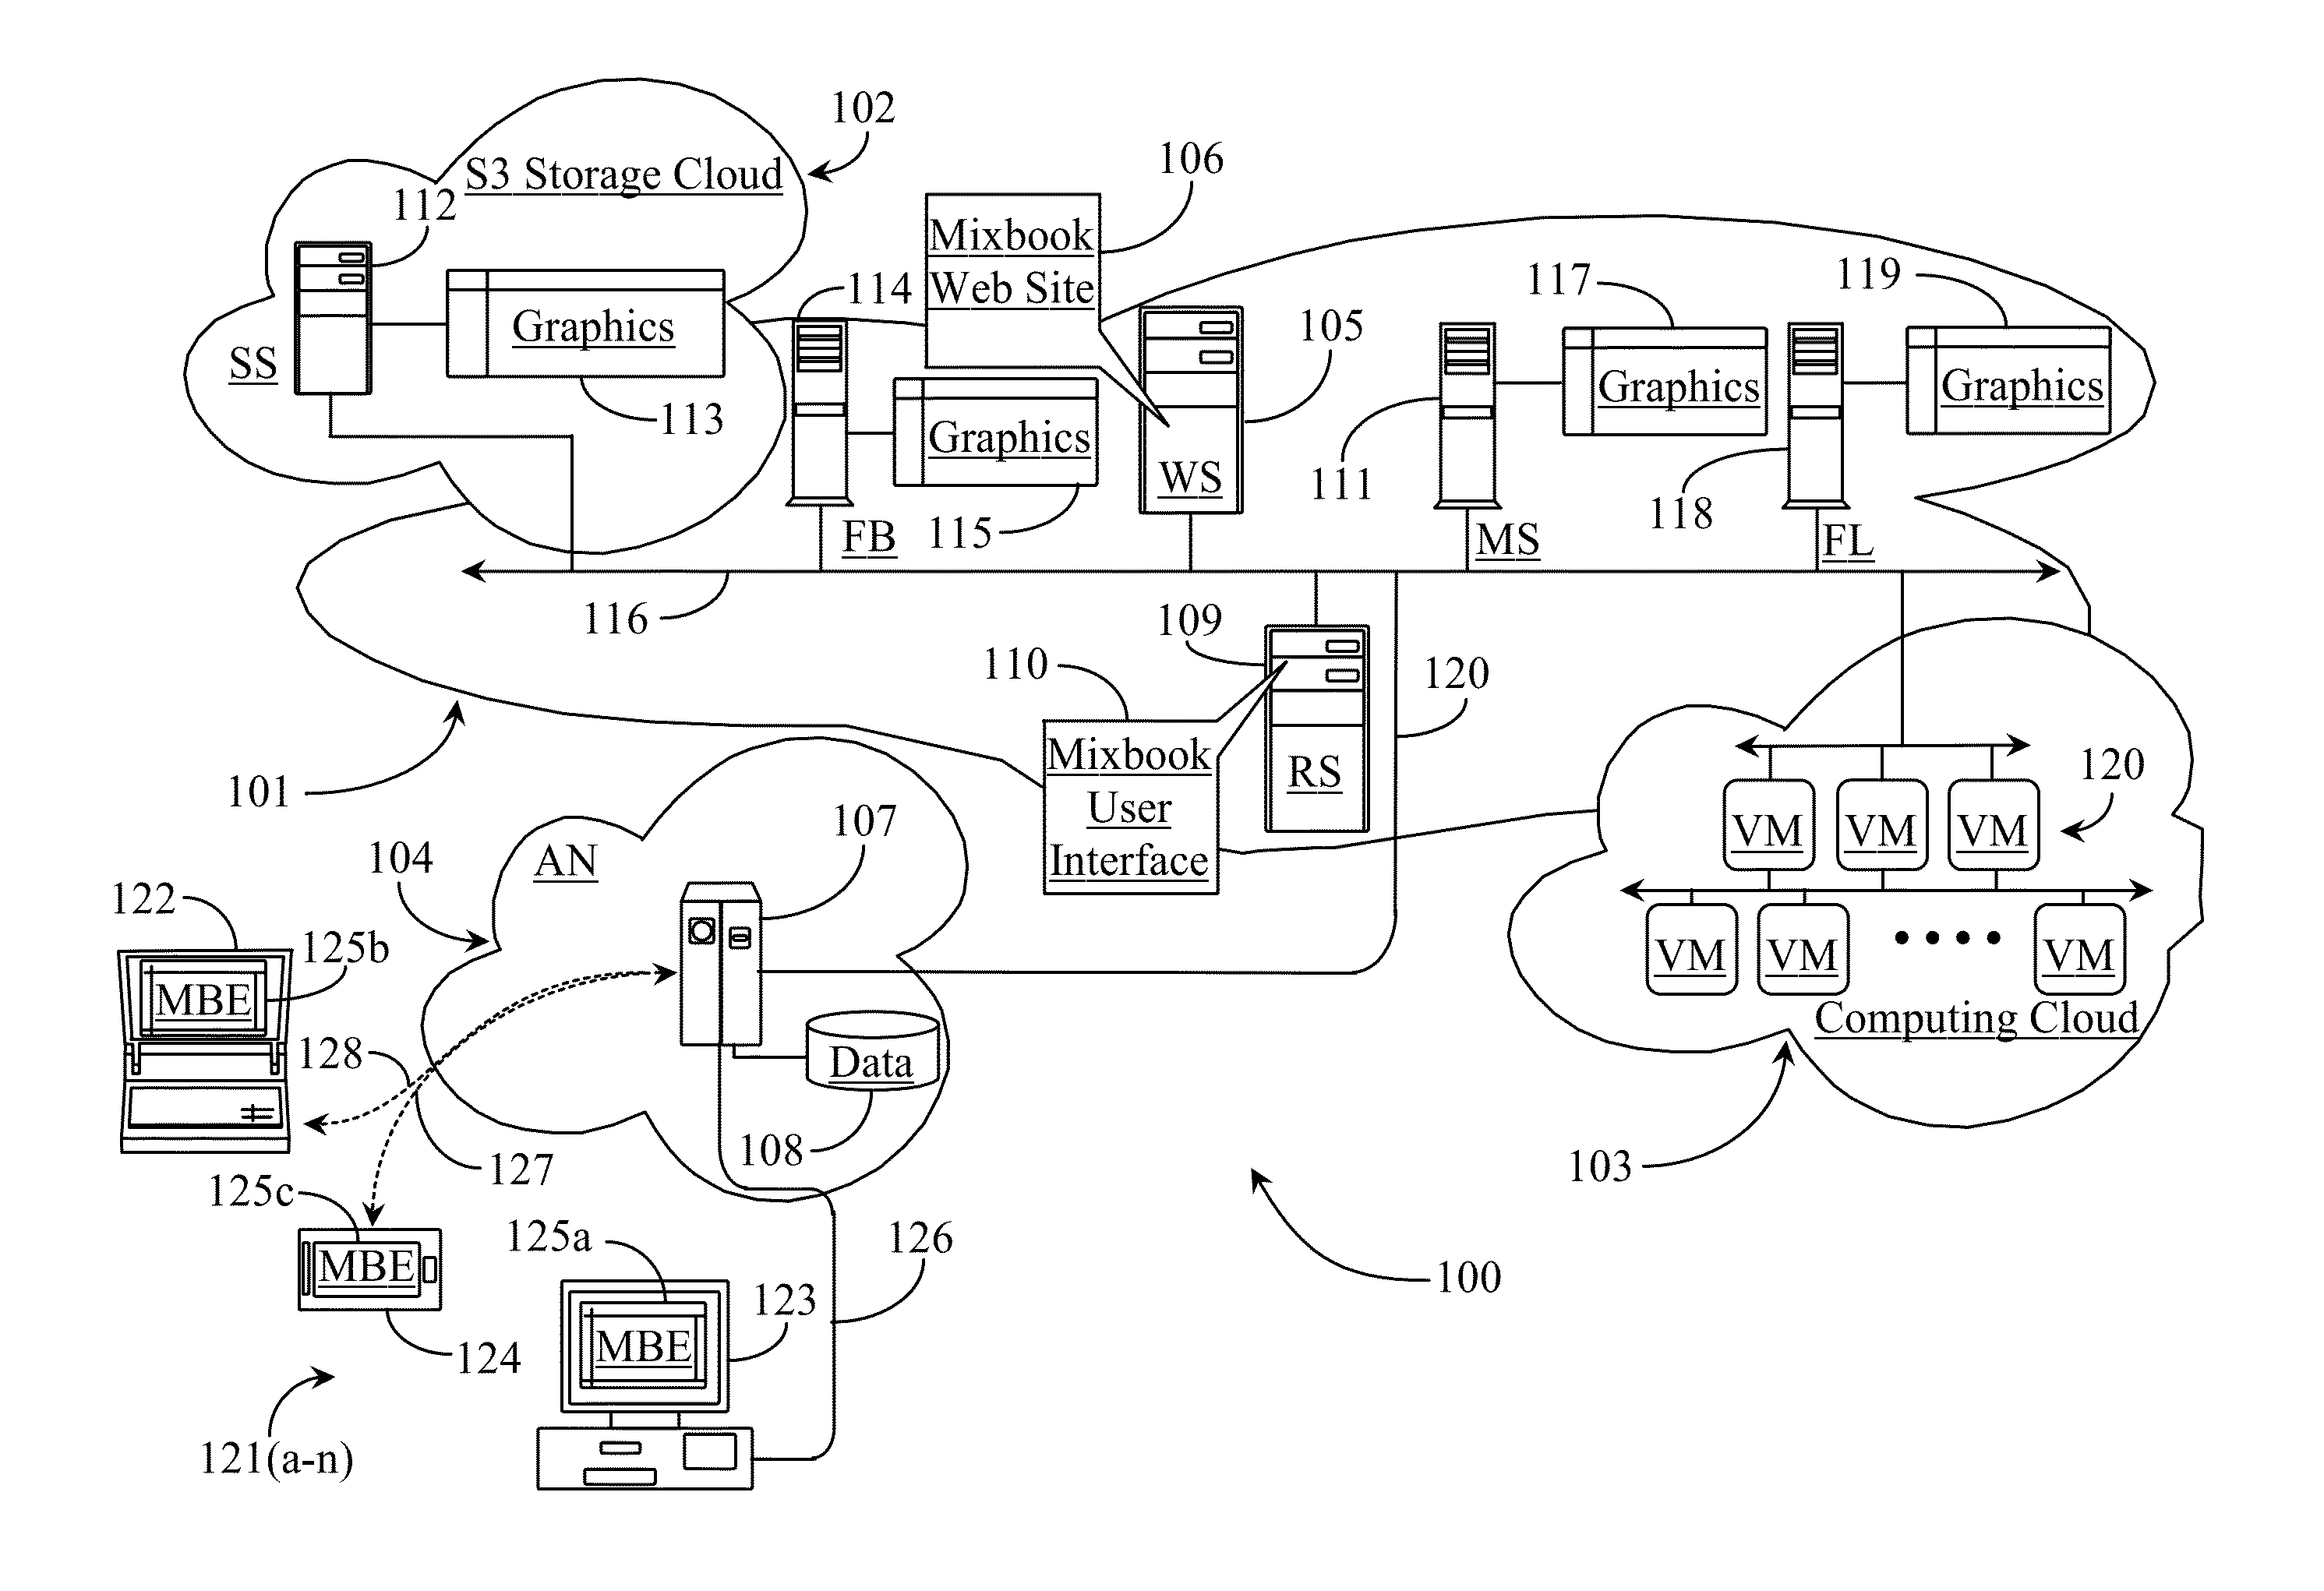 Method for Previewing Orders Placed for Image-Based Projects created through an Electronic Interface from a Mobile Application